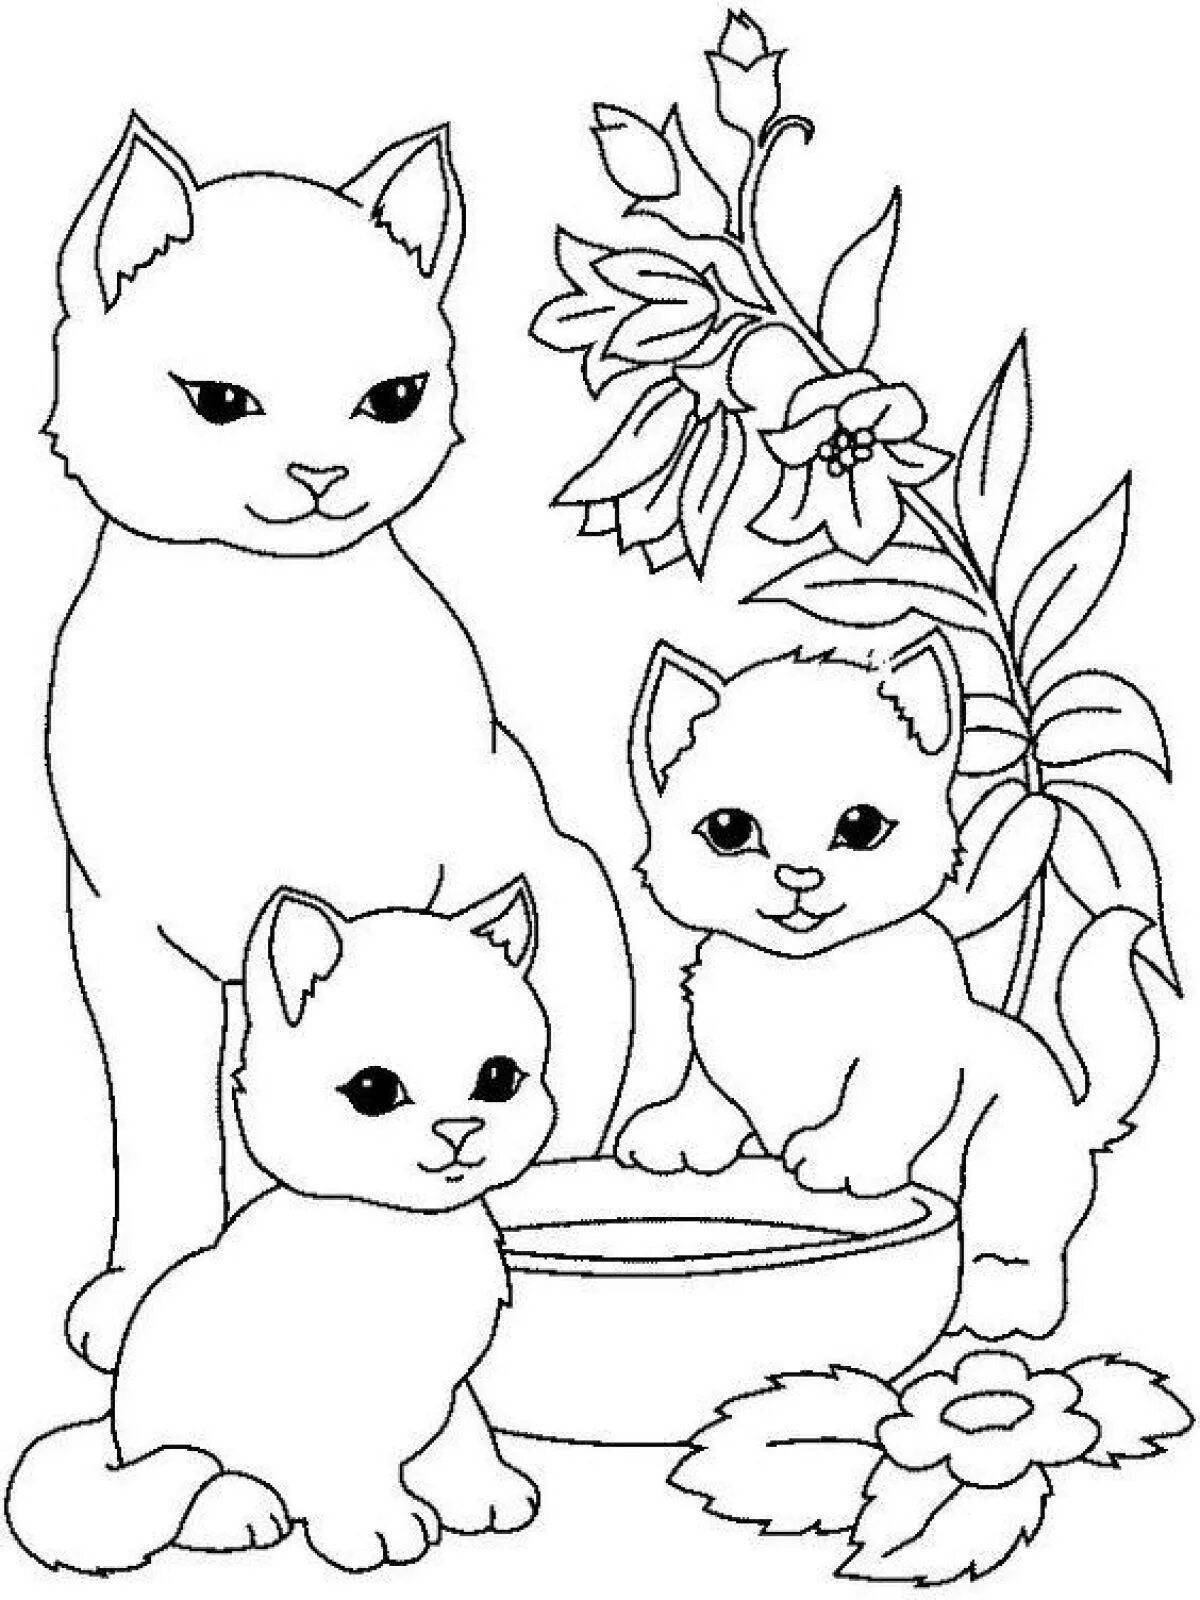 Unique coloring book for girls with 9 year old animals